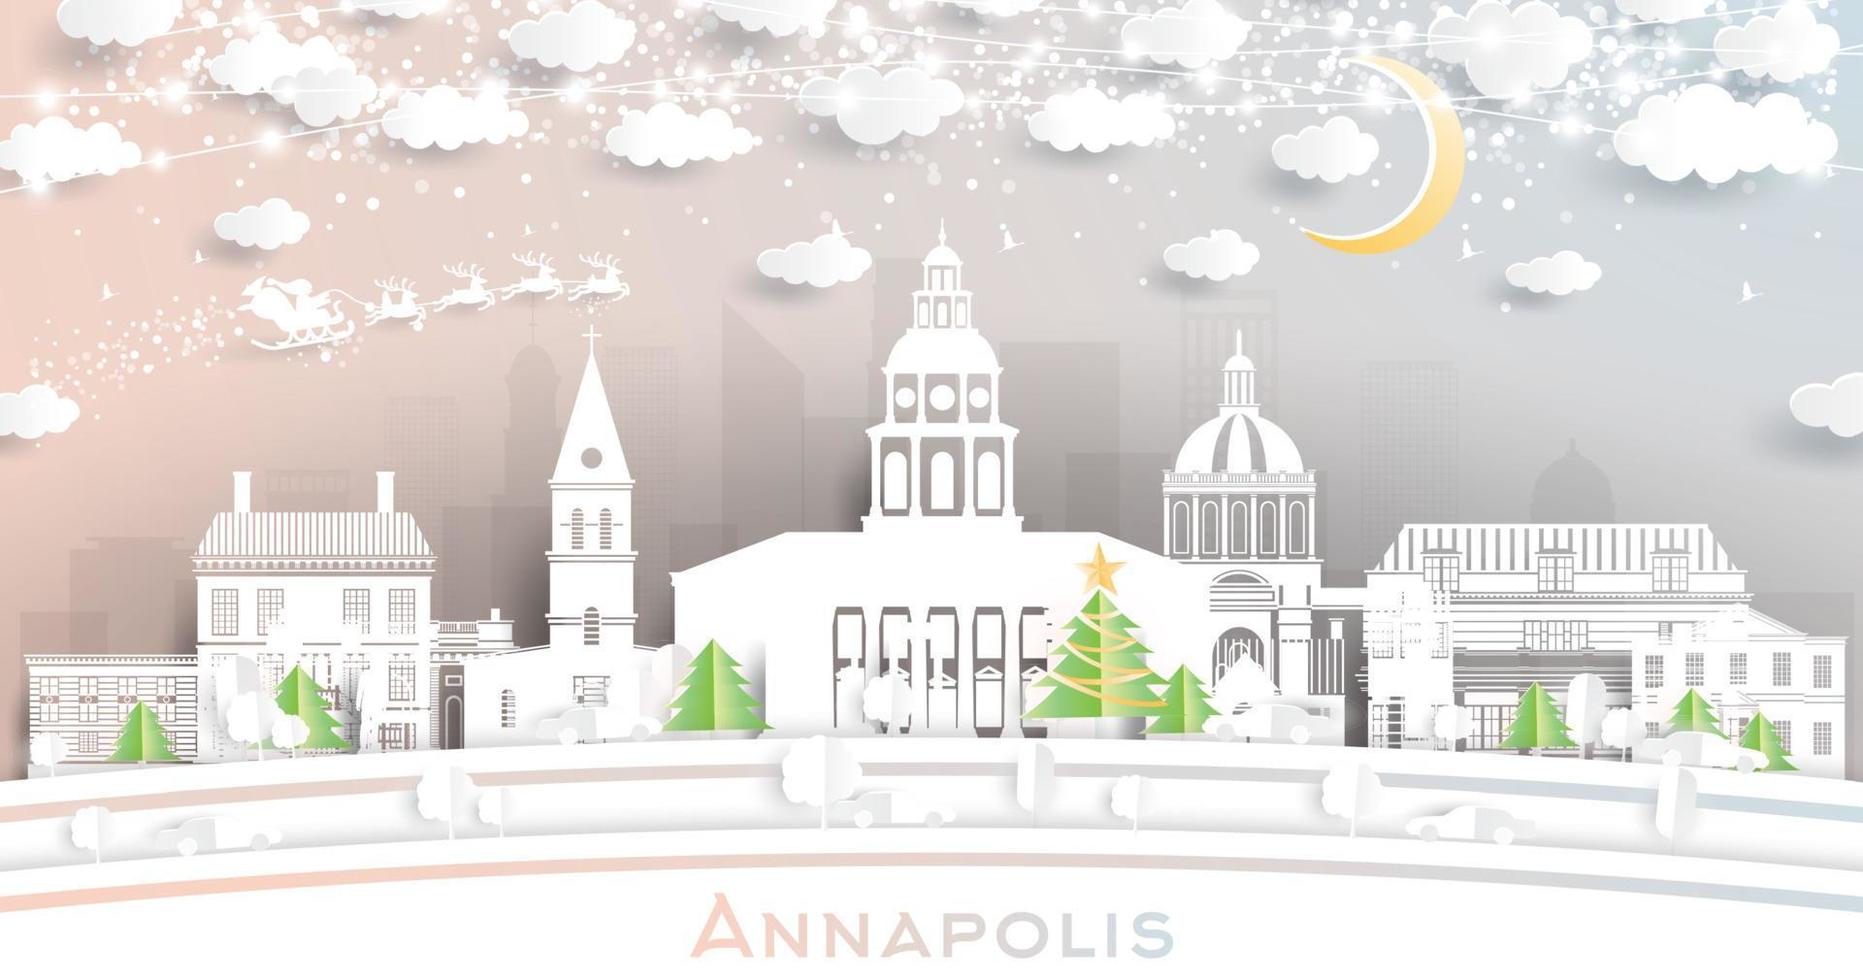 Annapolis Maryland City Skyline in Paper Cut Style with Snowflakes, Moon and Neon Garland. vector